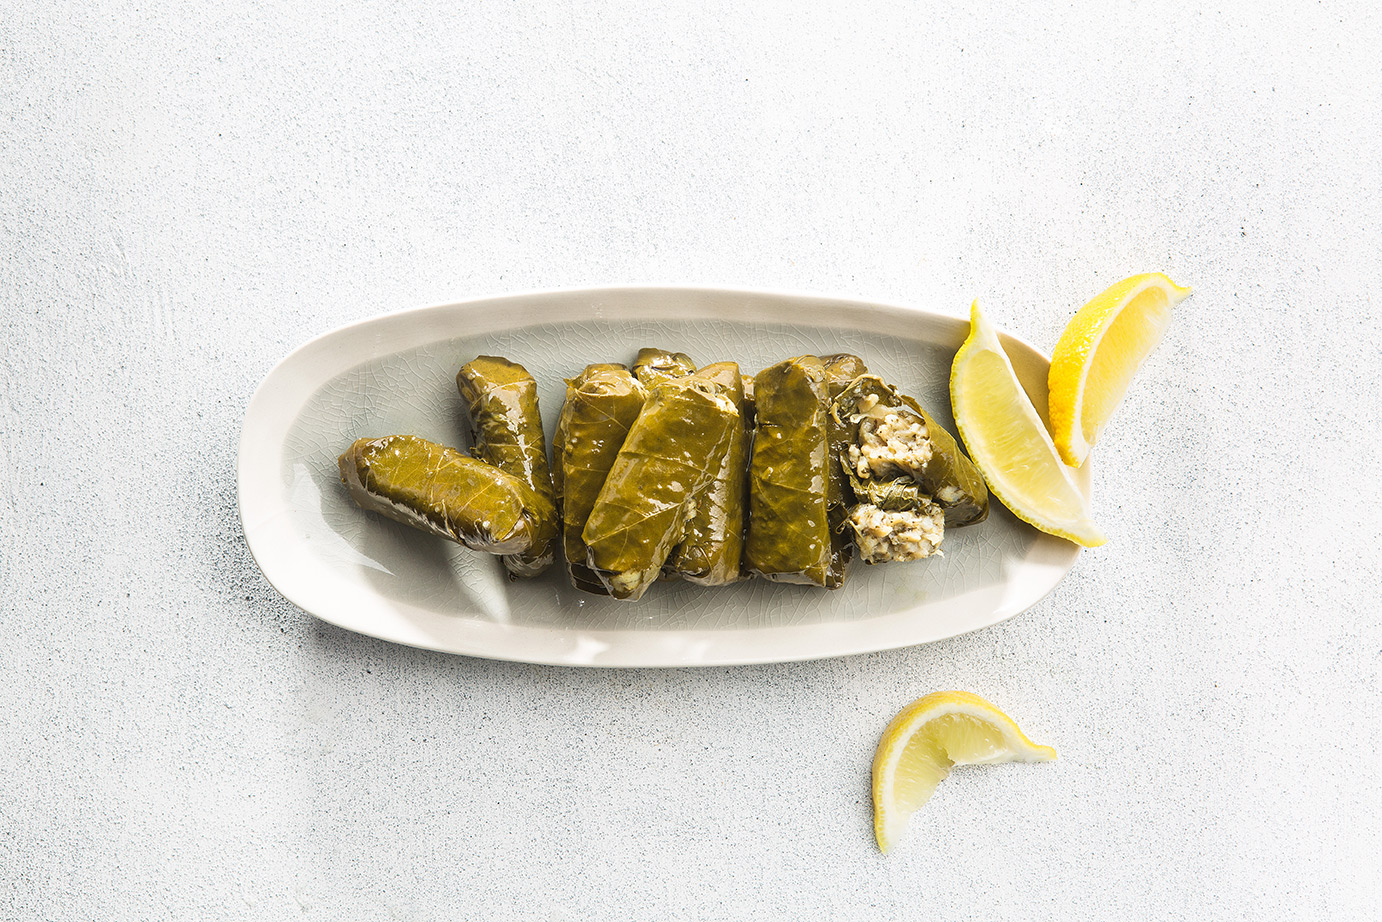 Image of dolmades arranged on a long serving dish with a side of lemon wedges to serve, shot from above